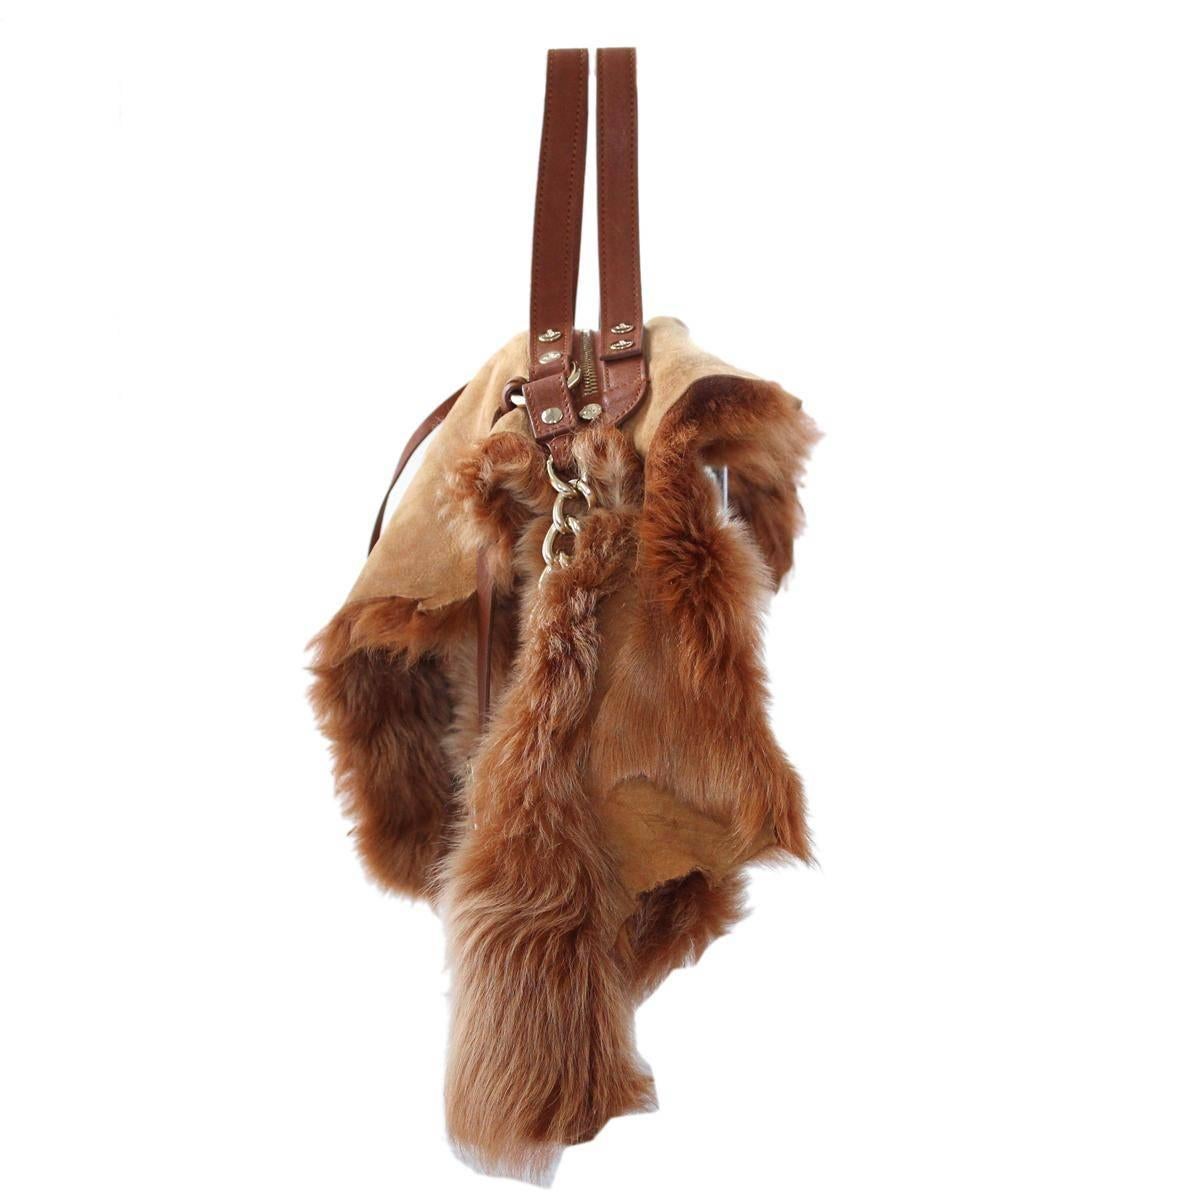 One of a kind !
Vivienne Westwood style !
Ecologic fur
Camel color
Golden chain
Two handles
Zip closure
Internal zip pocket
Cm 56 x 26 (22 x 10 inches)
With dustbag
Worldwide express shipping included in the price !